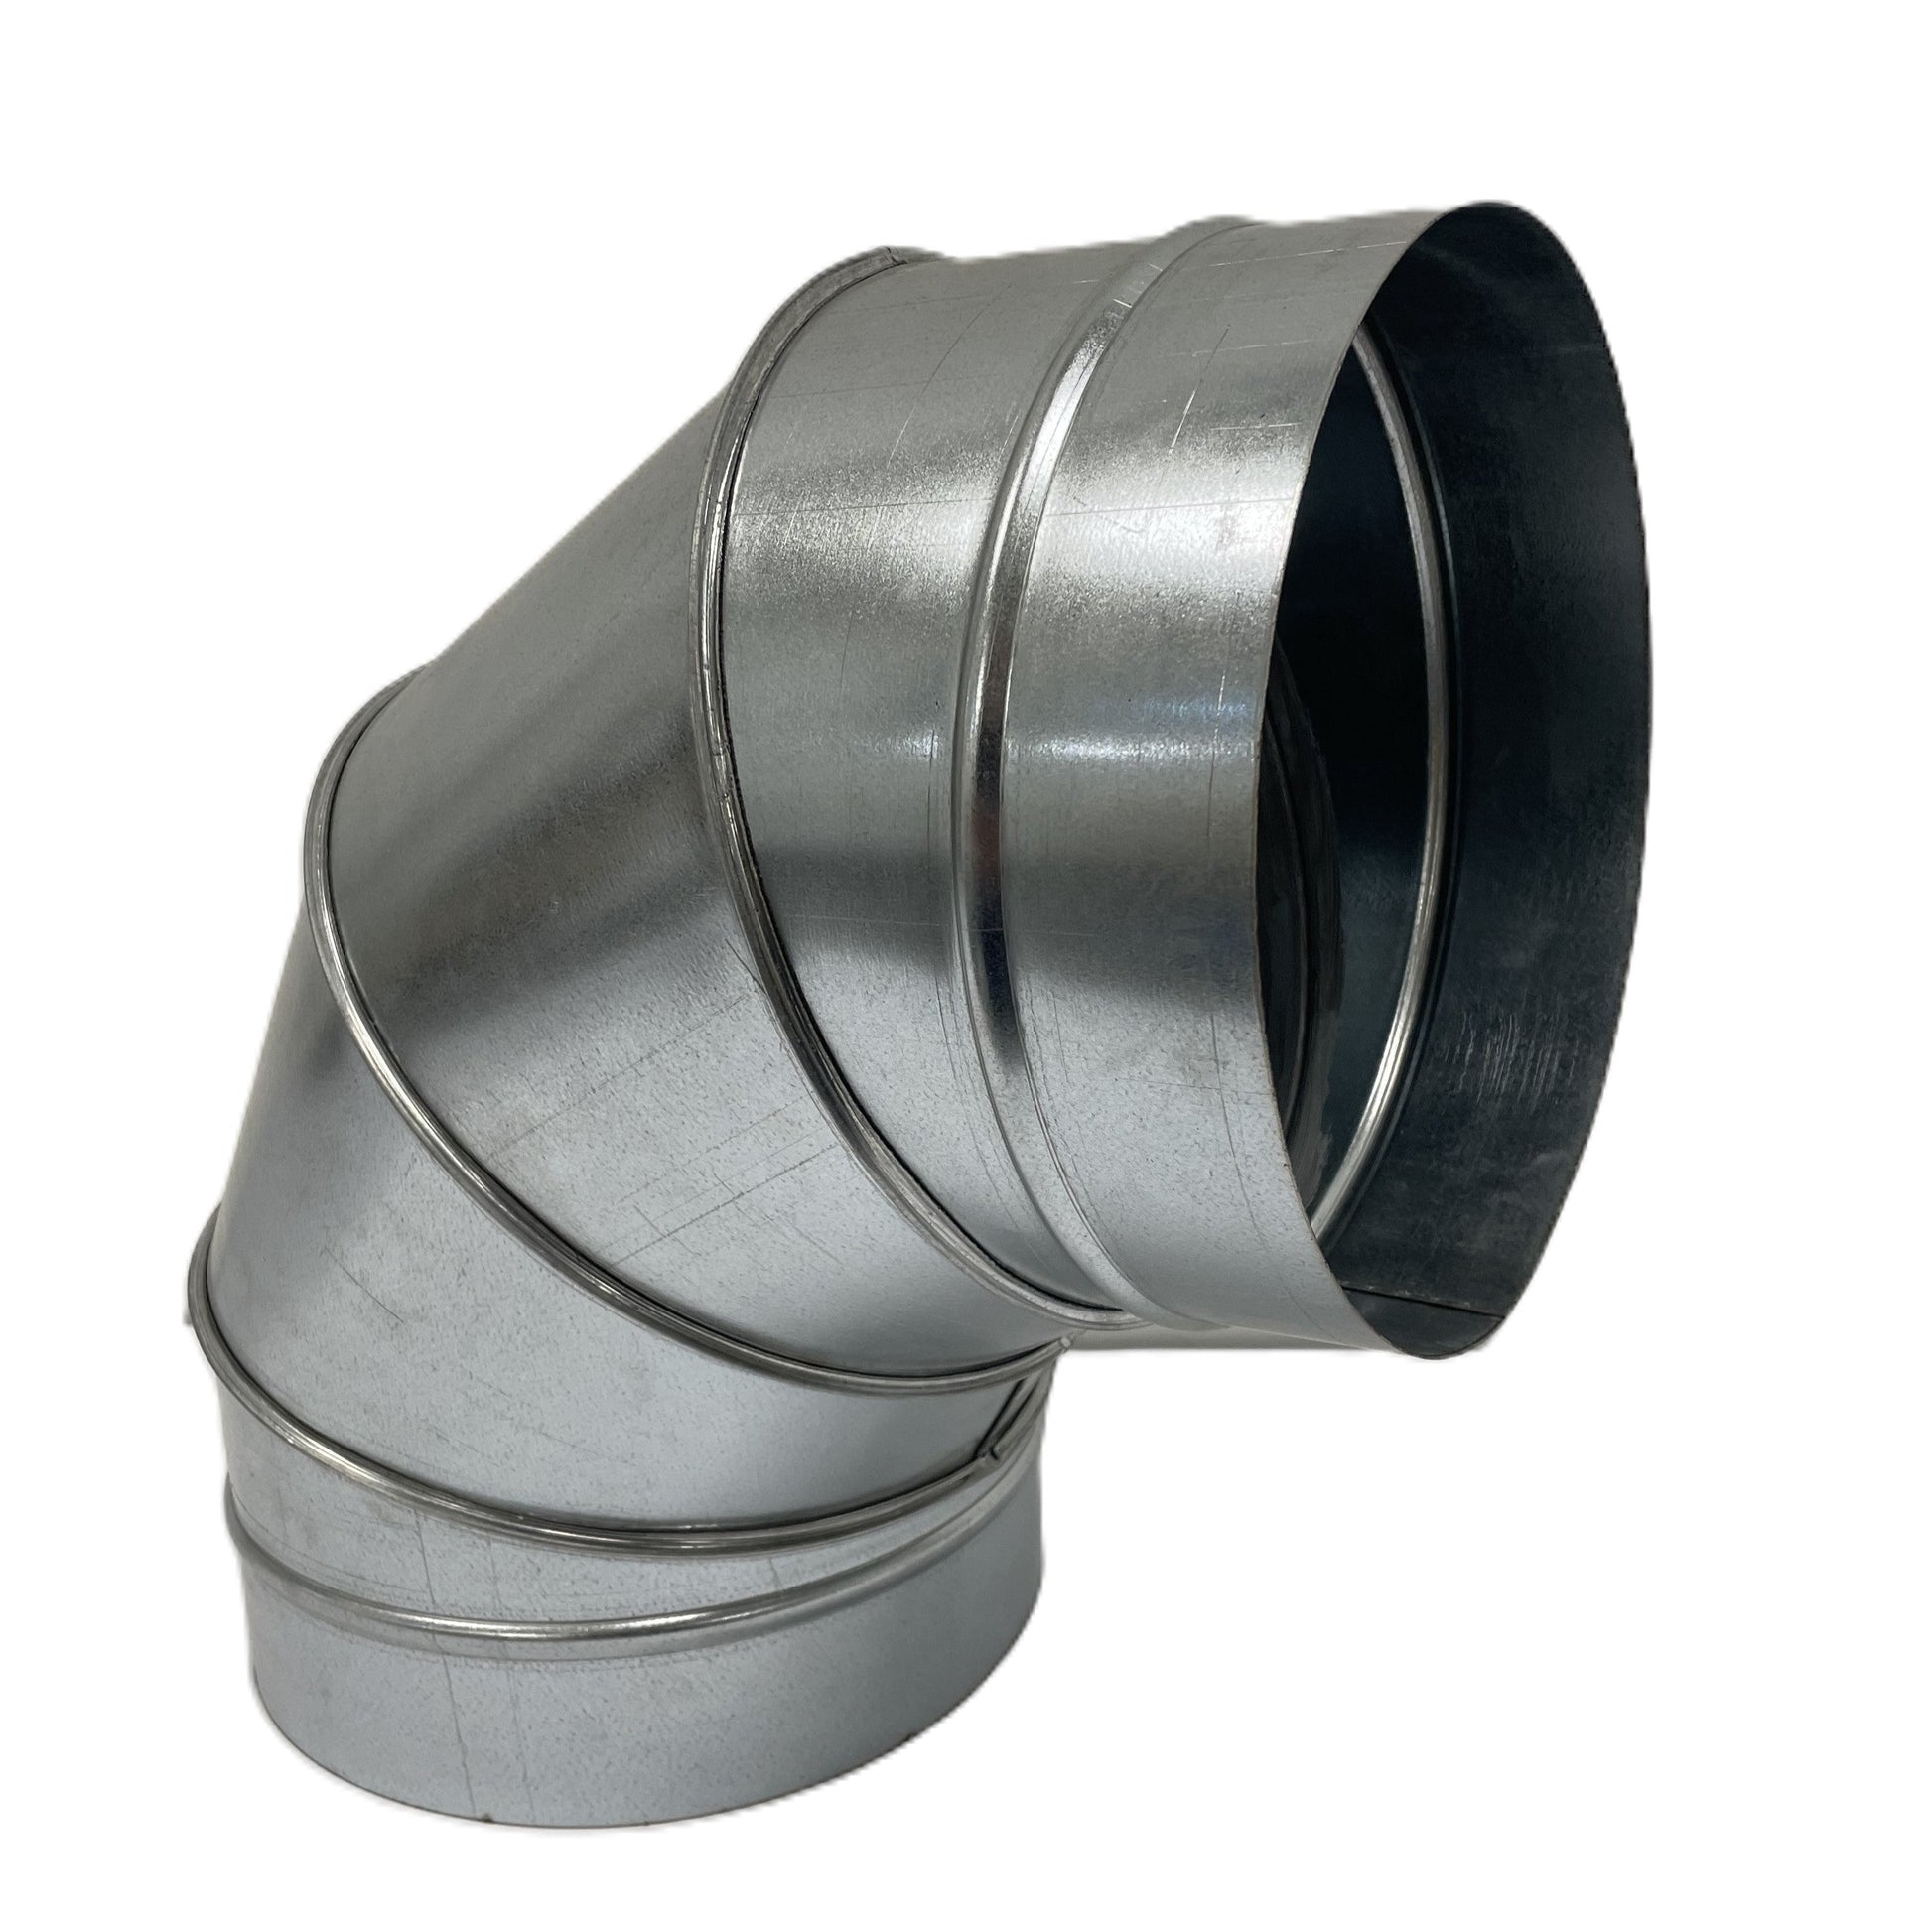 90 degree segmented bend for galvanised steel spiral ventilation systems